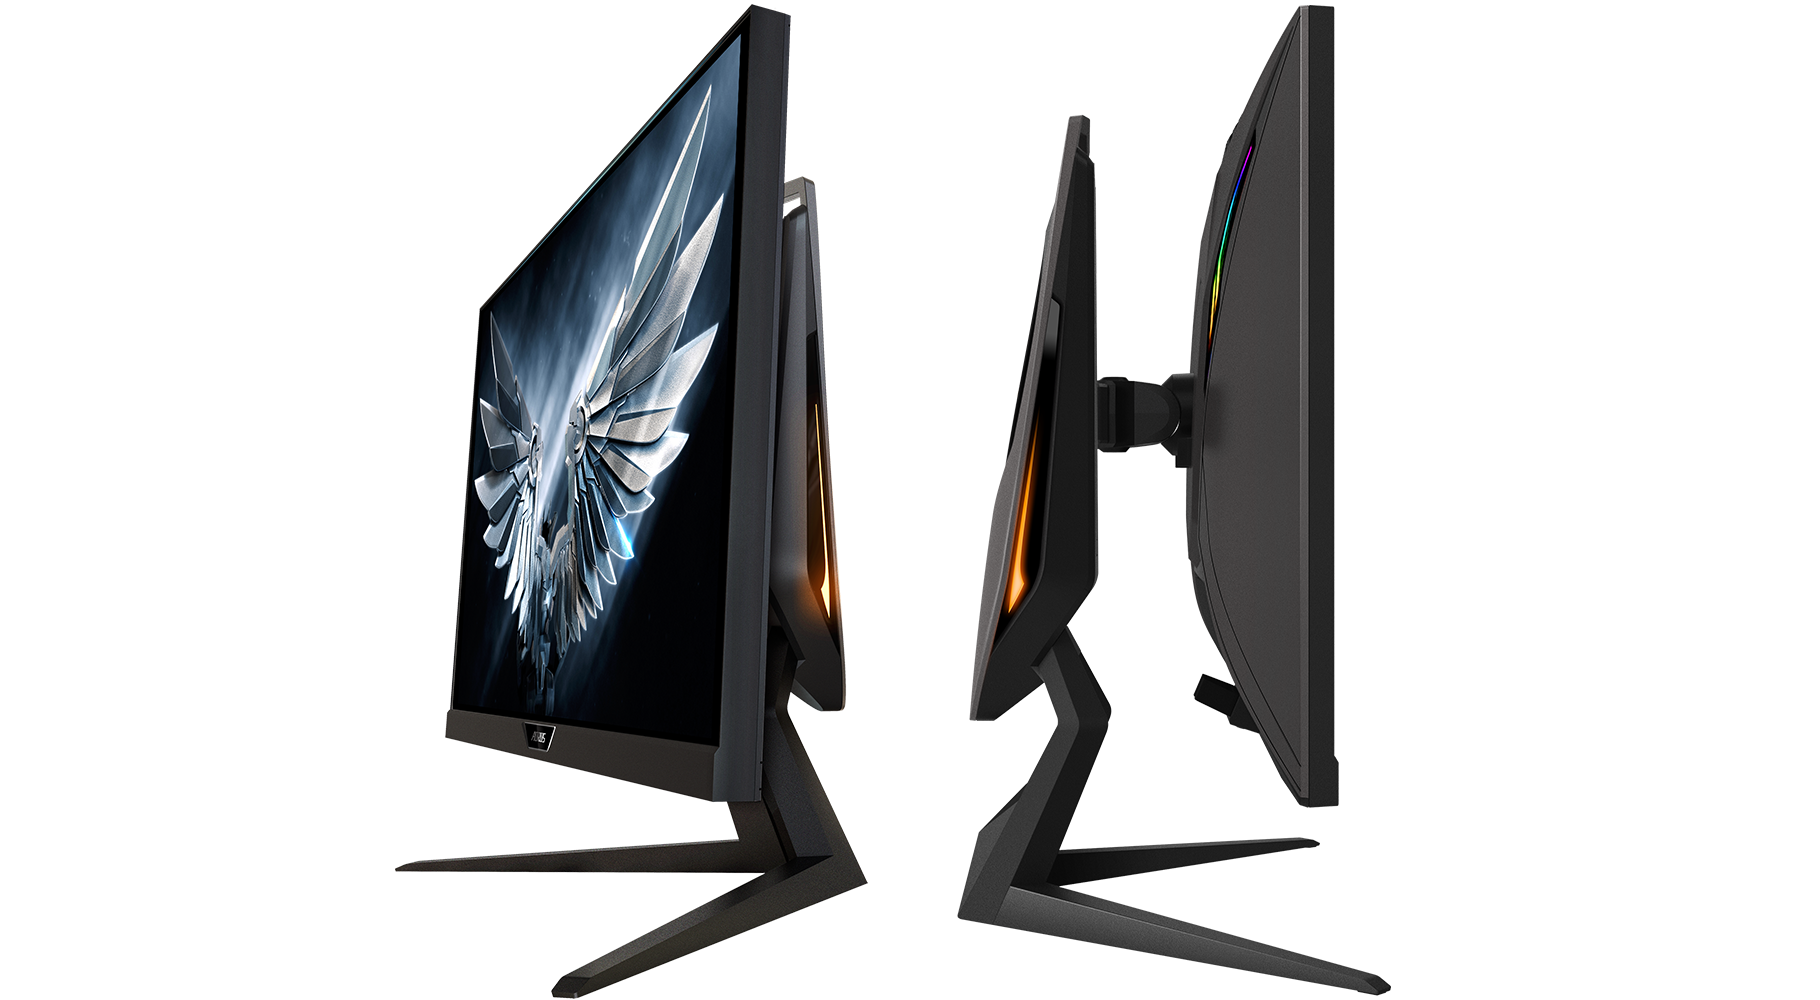 Media asset in full size related to 3dfxzone.it news item entitled as follows: GIGABYTE introduce il gaming monitor AORUS FI27Q-P: 2K a 165Hz con HBR3 | Image Name: news30637_AORUS-FI27Q-P_4.png